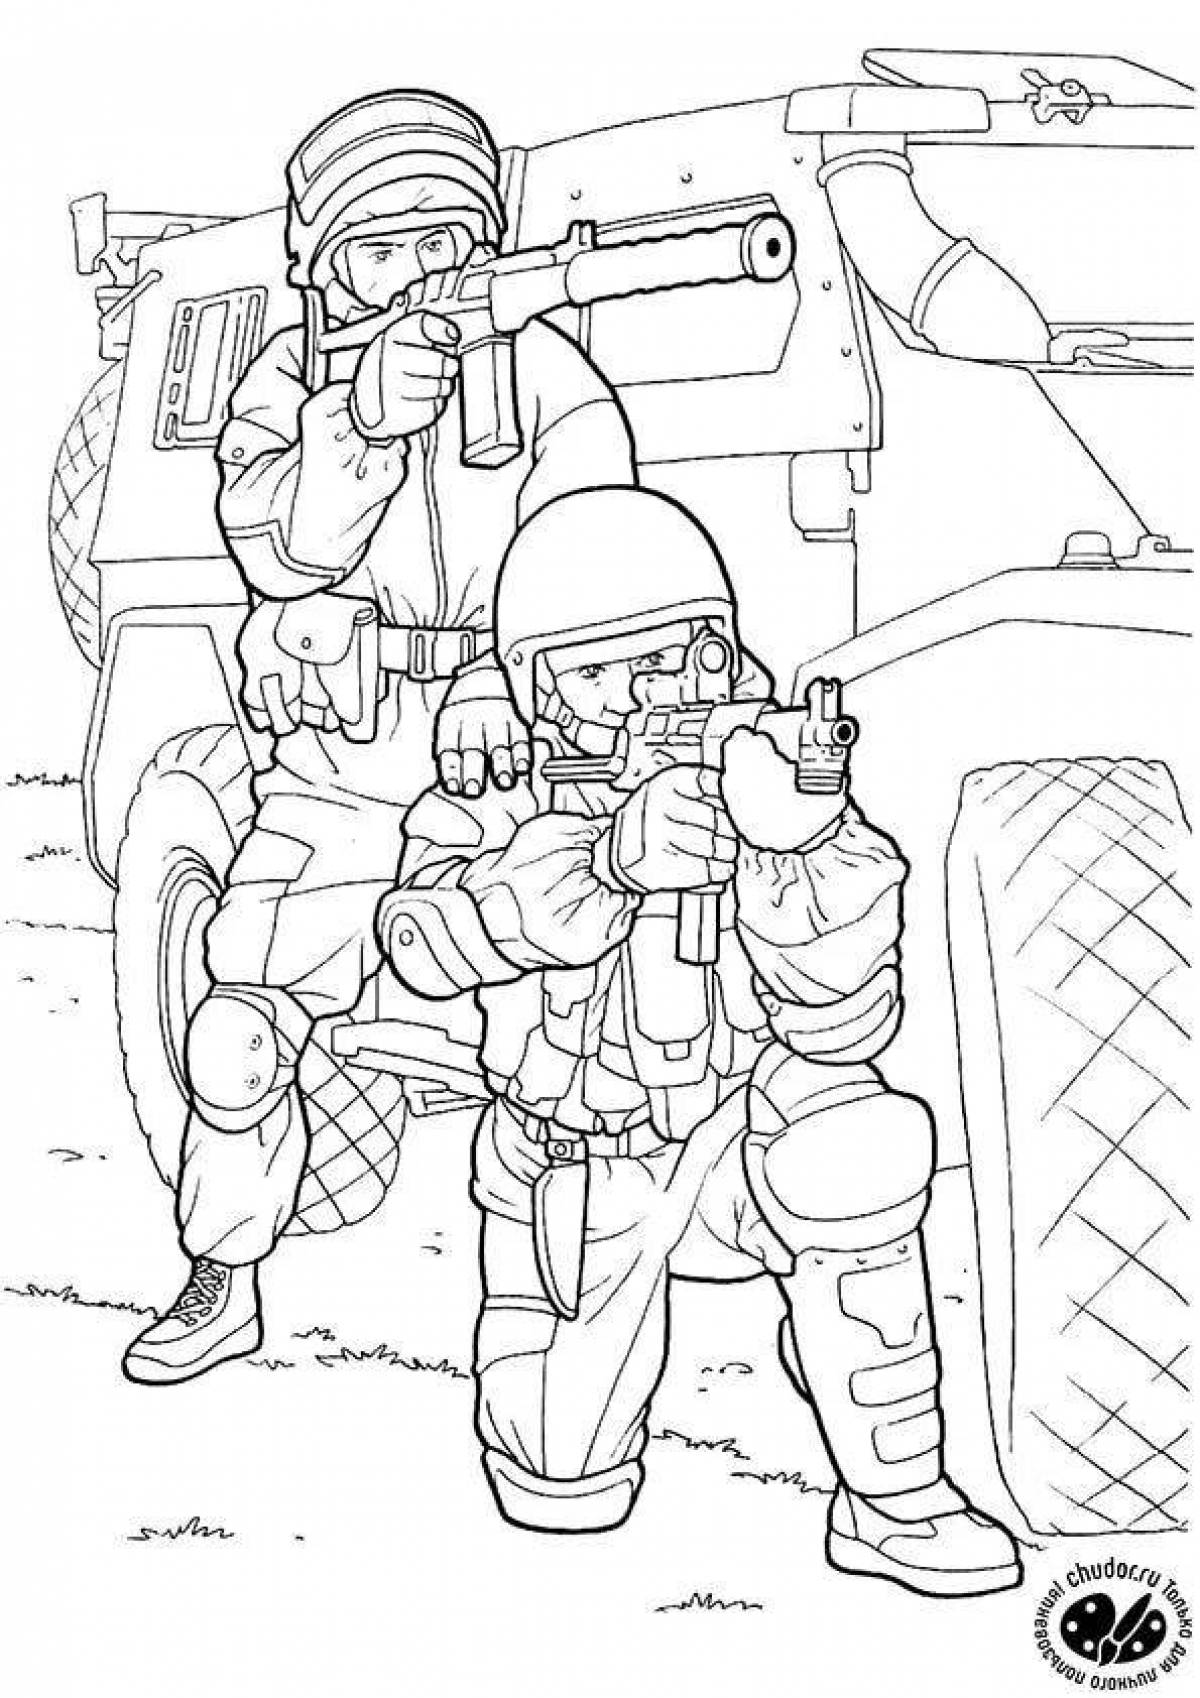 Fearless military soldiers coloring page for boys